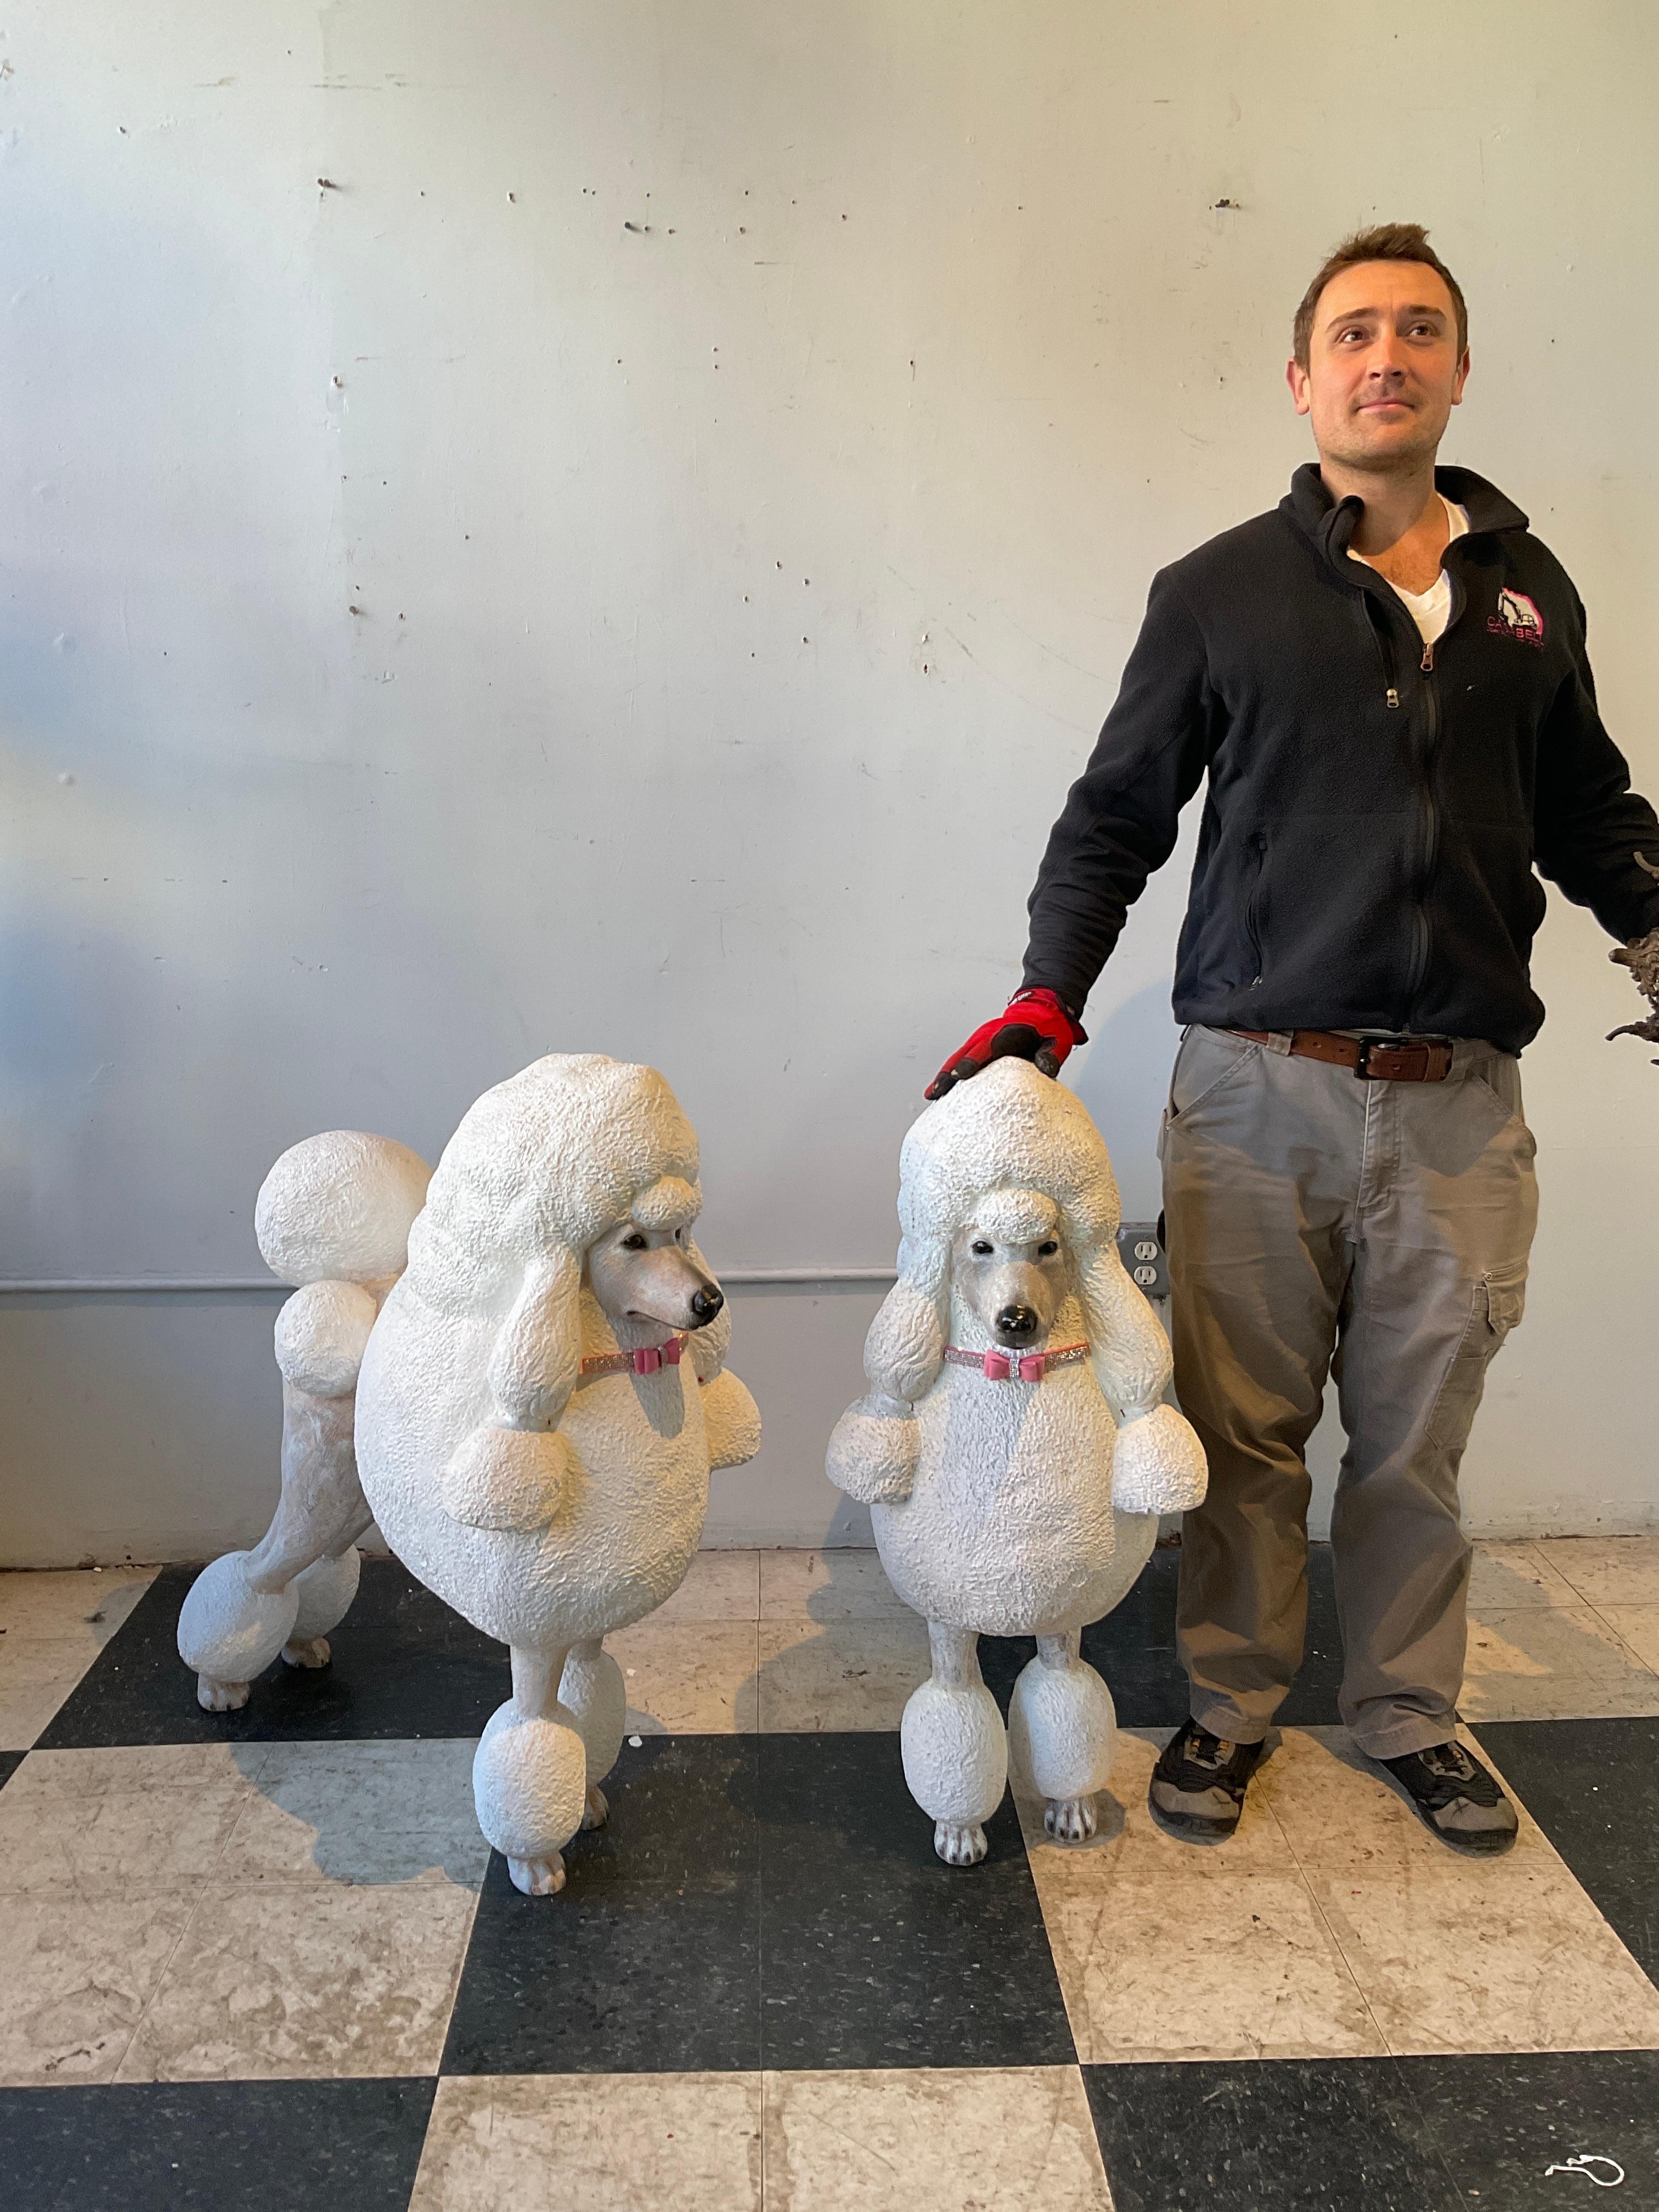 Pair of amazingly lifelike French Poodles made from fiberglass. Used on the TV show The Marvelous Mrs. Maisel.